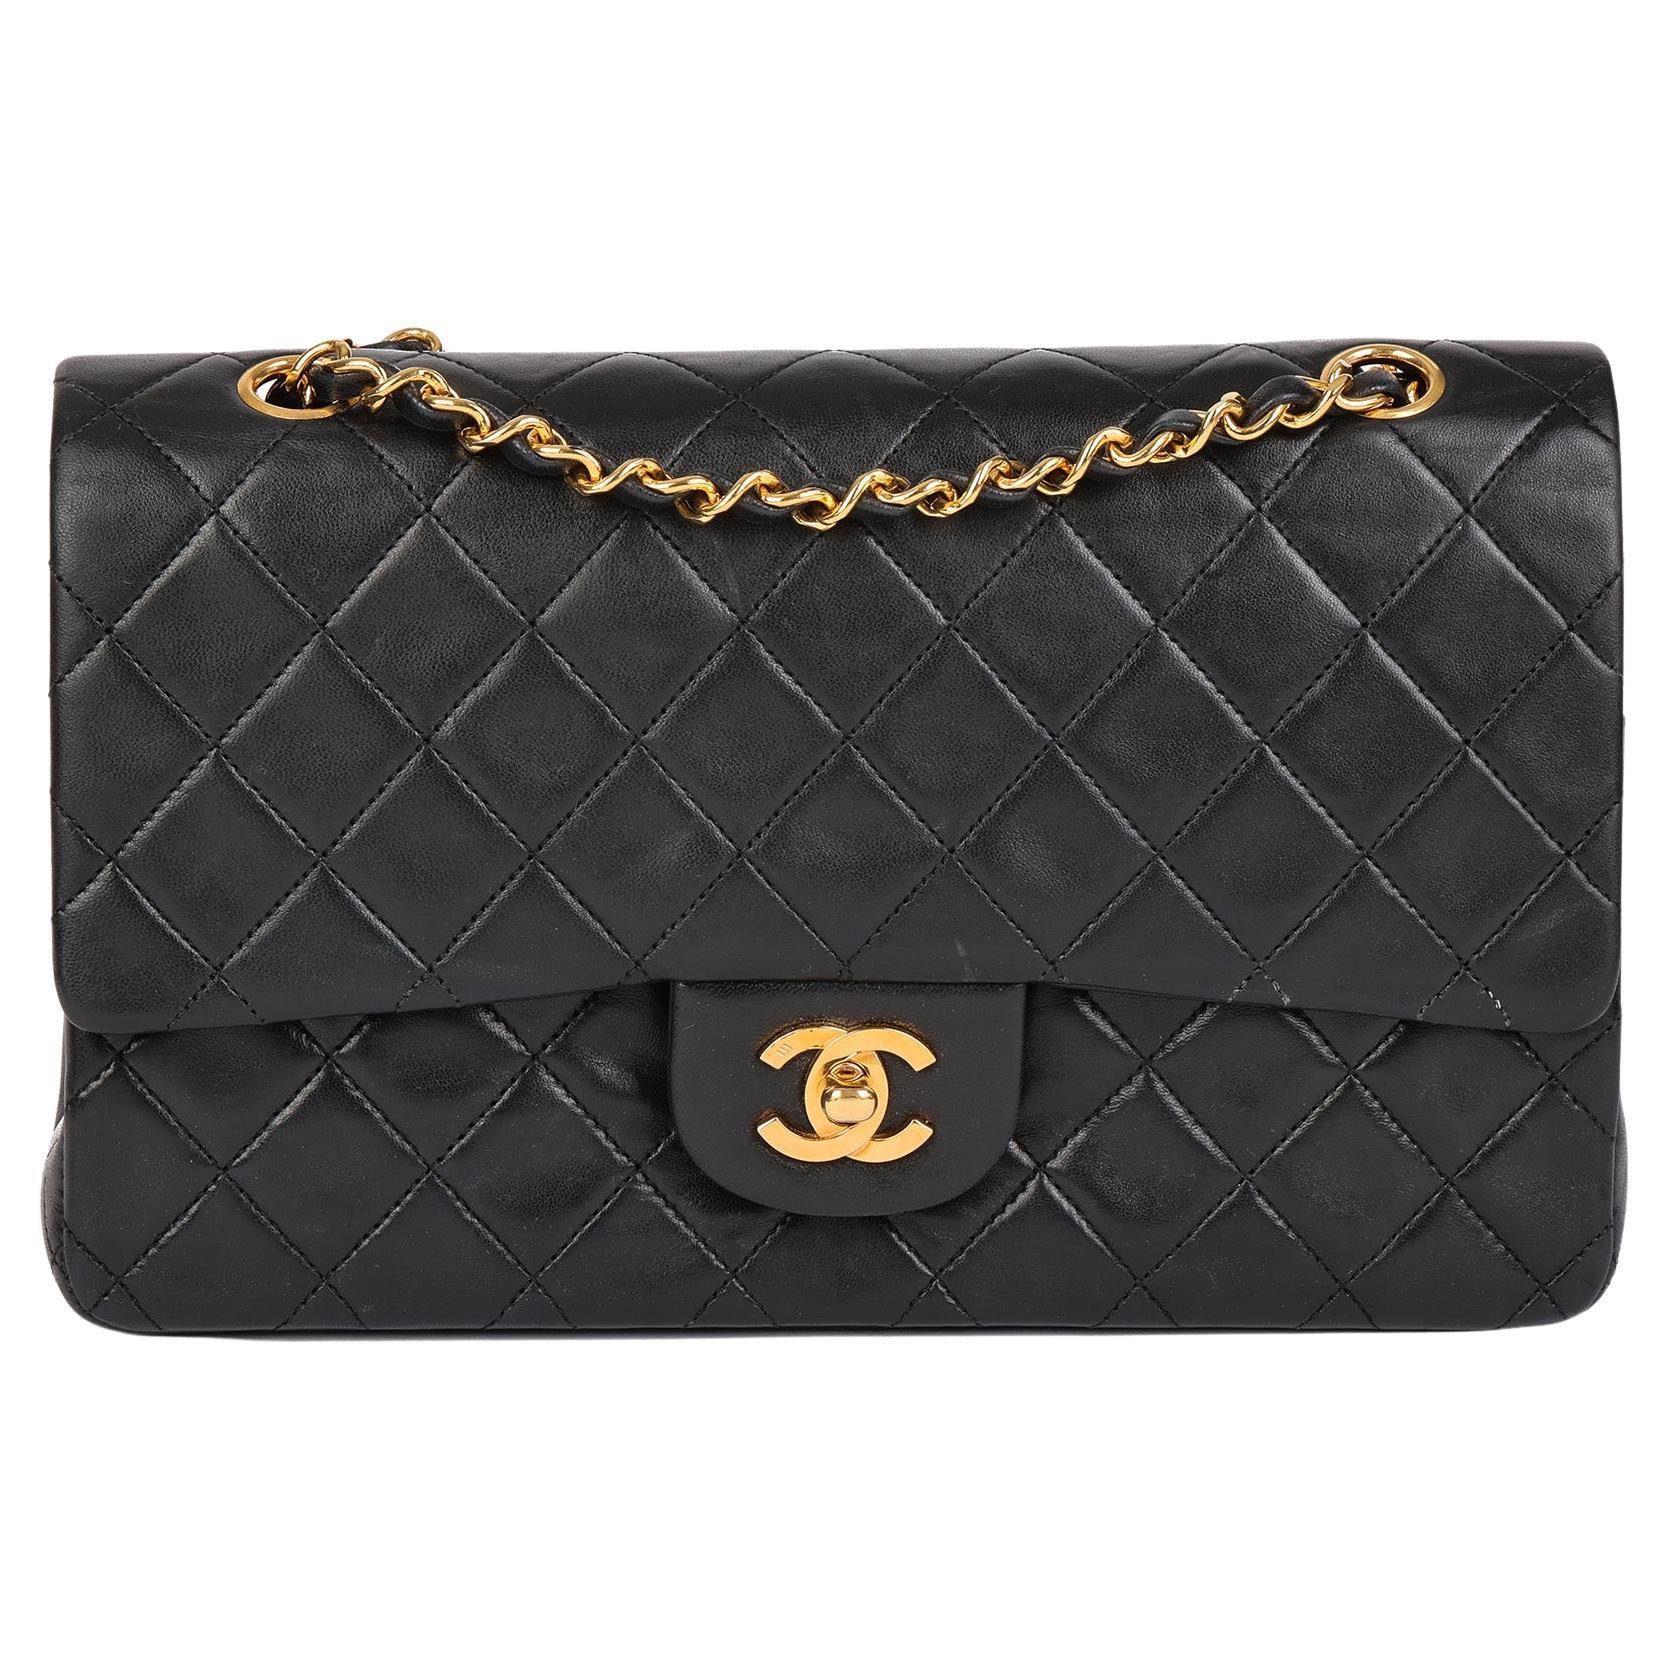 Chanel BLACK QUILTED LAMBSKIN VINTAGE MEDIUM CLASSIC DOUBLE FLAP BAG